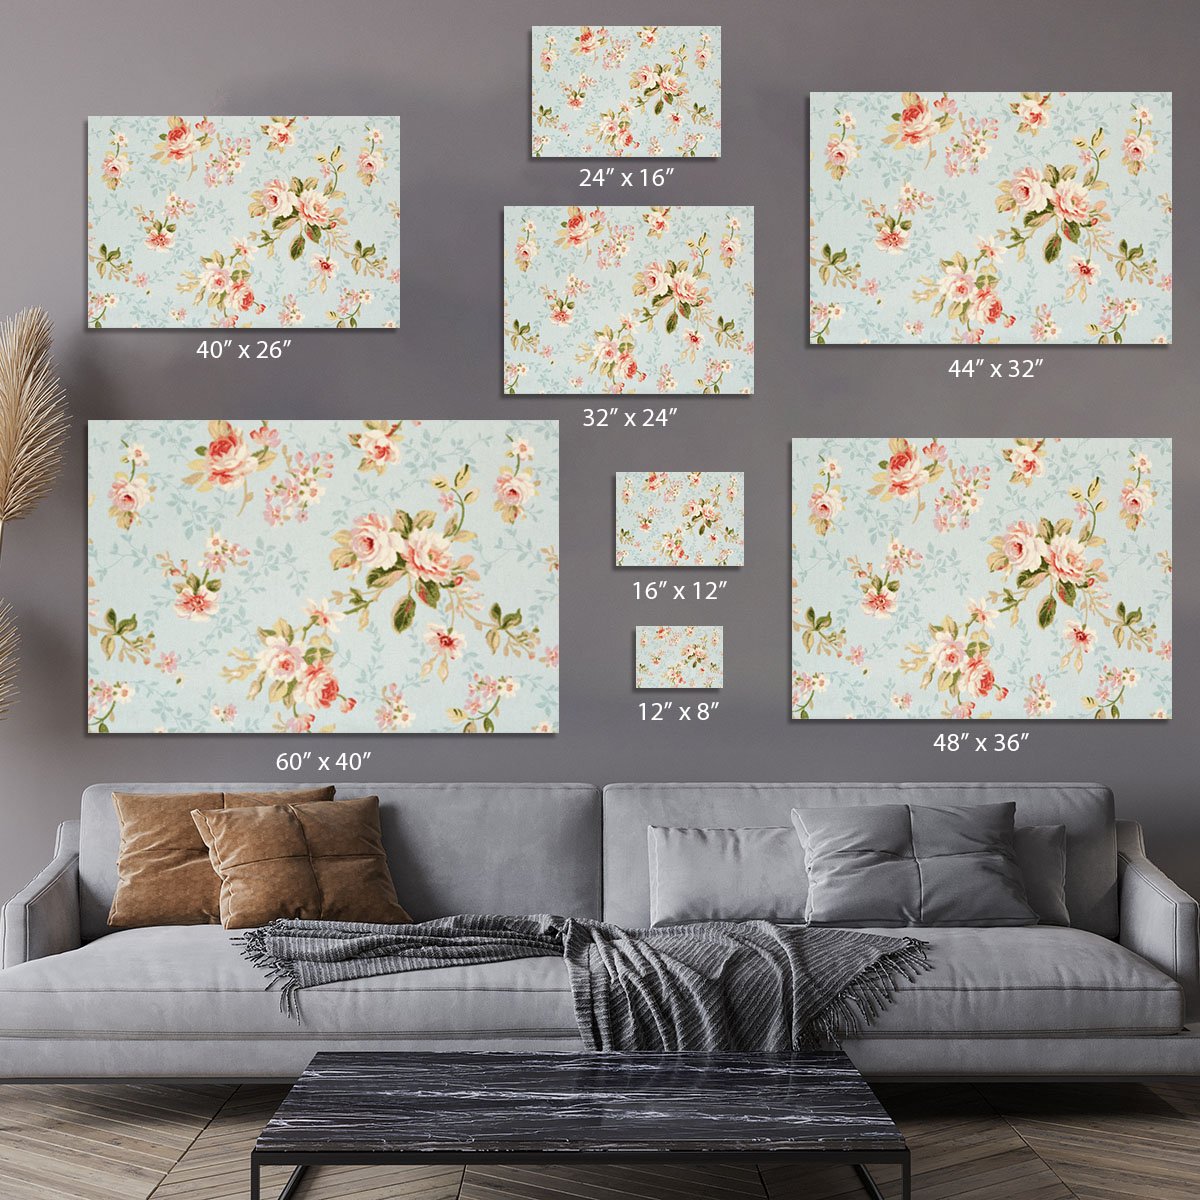 Rose floral tapestry Canvas Print or Poster